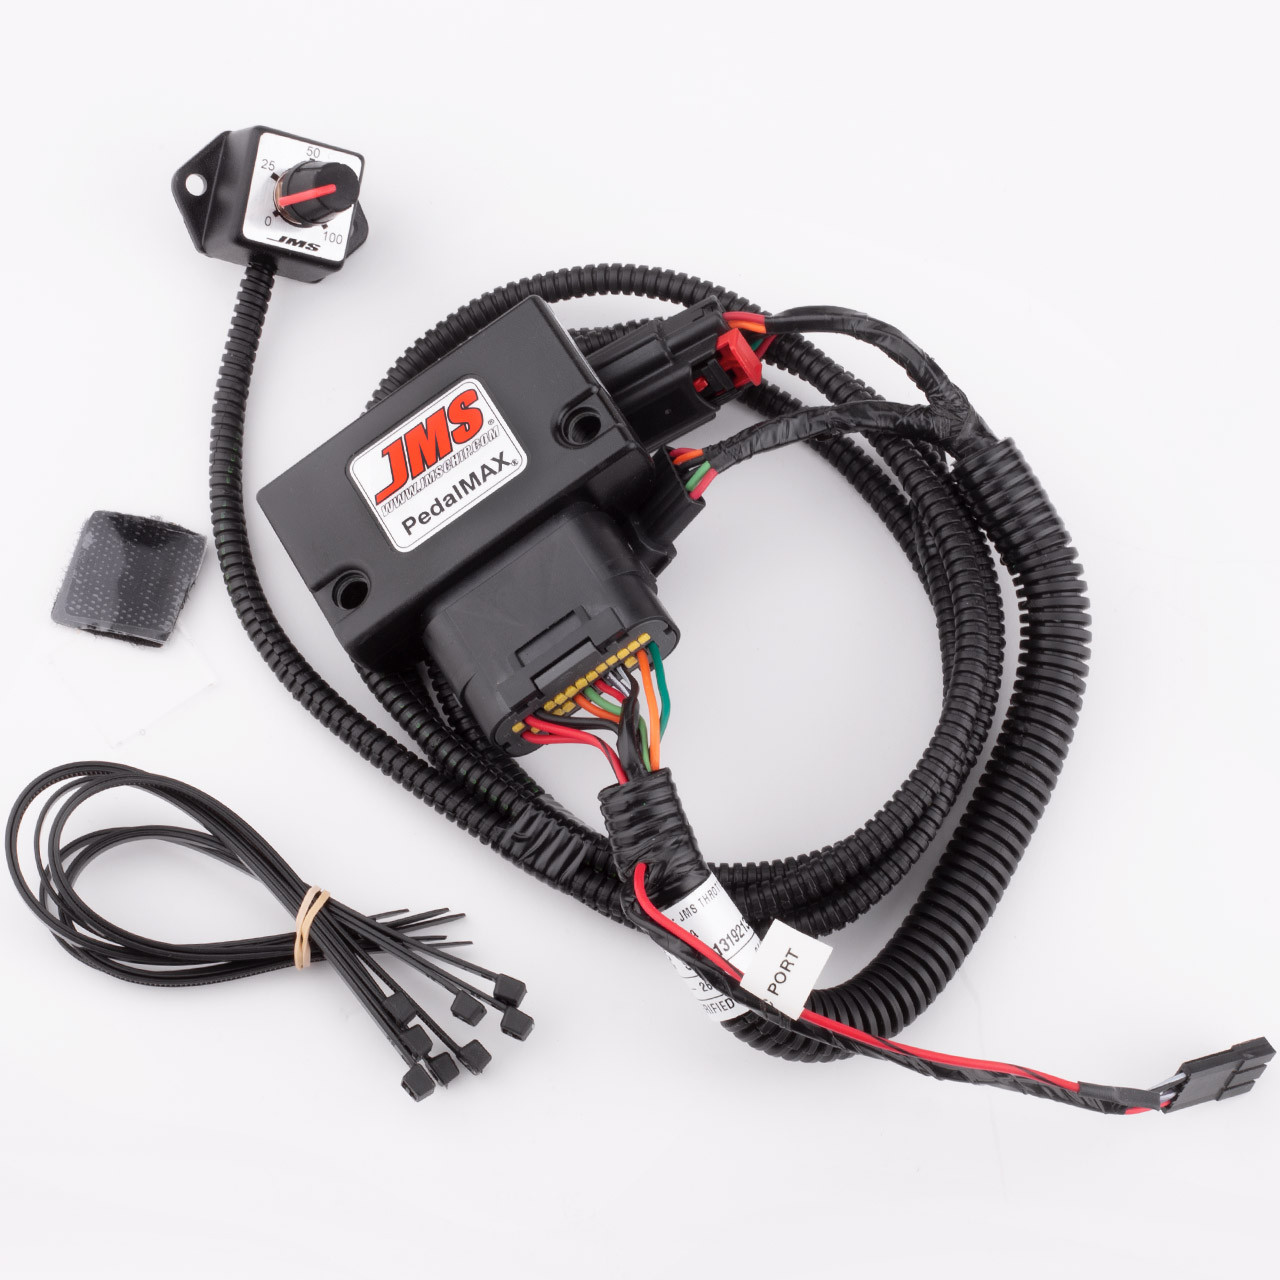 GTR PEDALMAX DRIVE BY WIRE THROTTLE ENHANCEMENT DEVICE - PLUG AND PLAY - PX1219NSV3